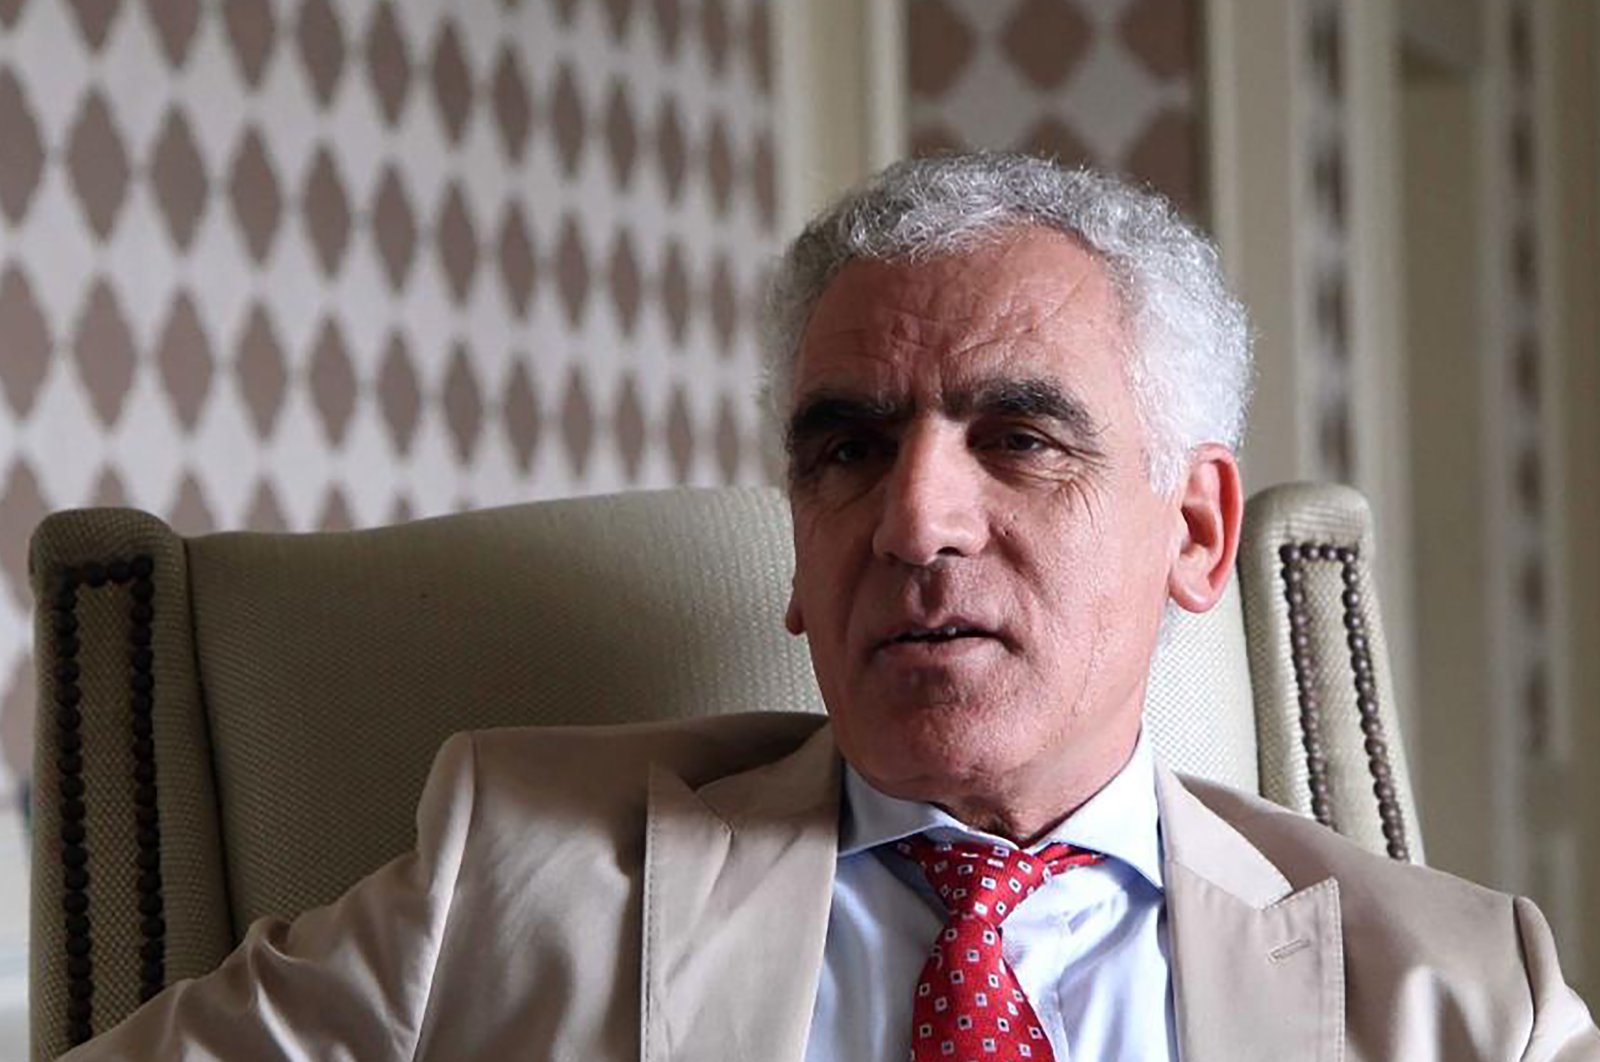 Mohammad Abdul Karim Raied, the president of the Libyan parliament's Economy, Trade and Investment Committee, gives a statement to Anadolu Agency on Oct. 1, 2020. (AA Photo)